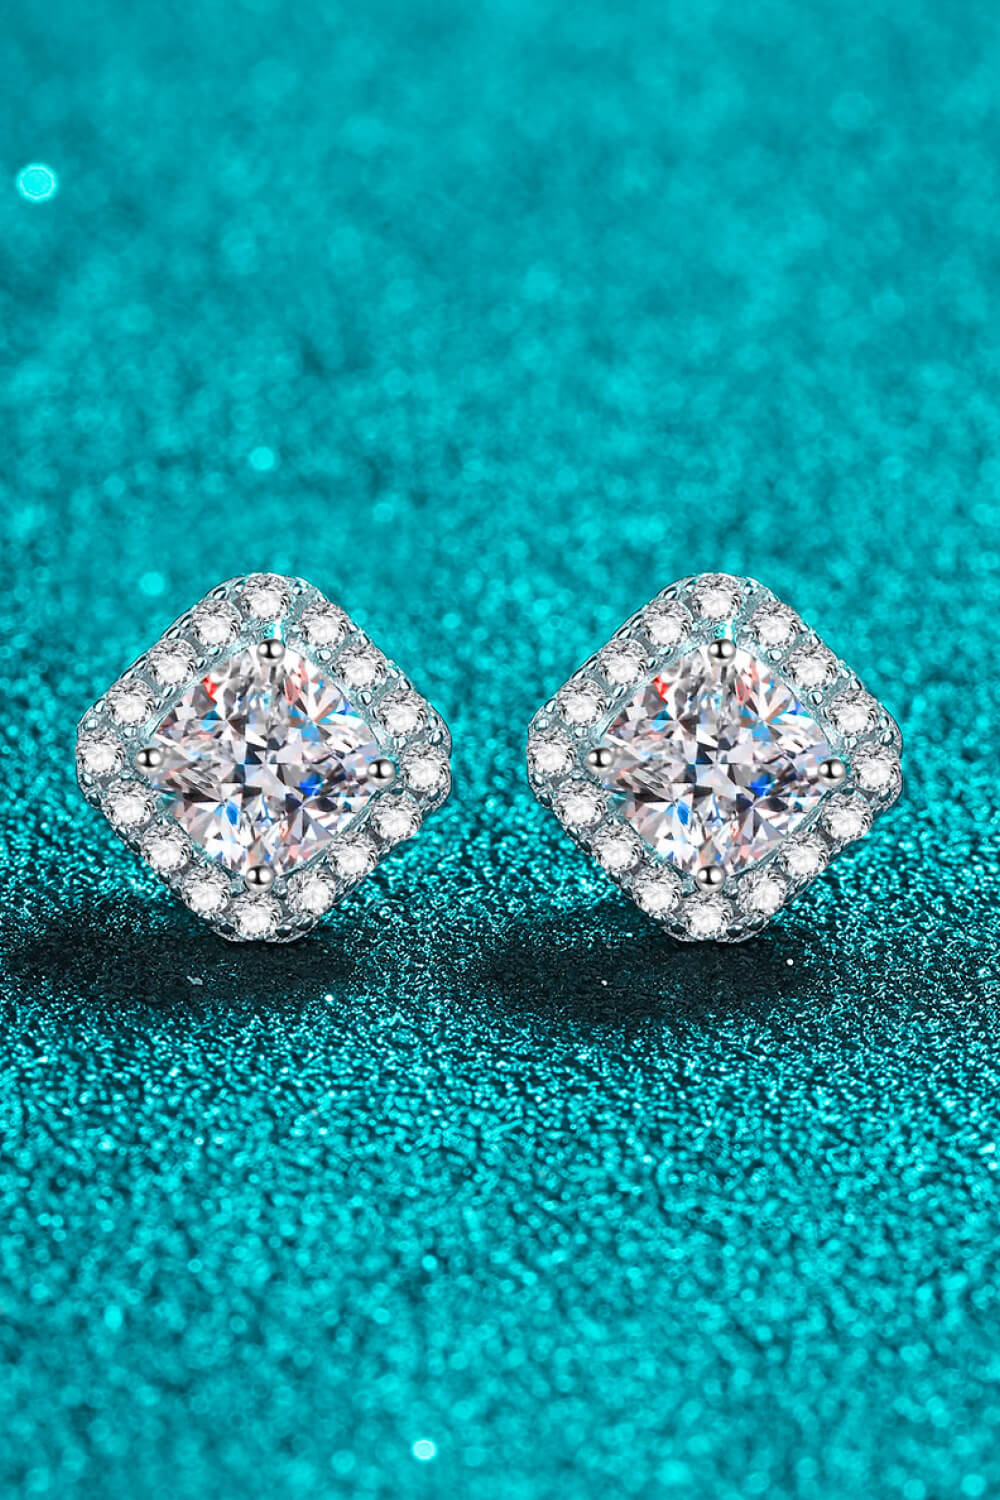 Women's 925 Sterling Silver Inlaid 2 Carat Moissanite Square Stud Earrings